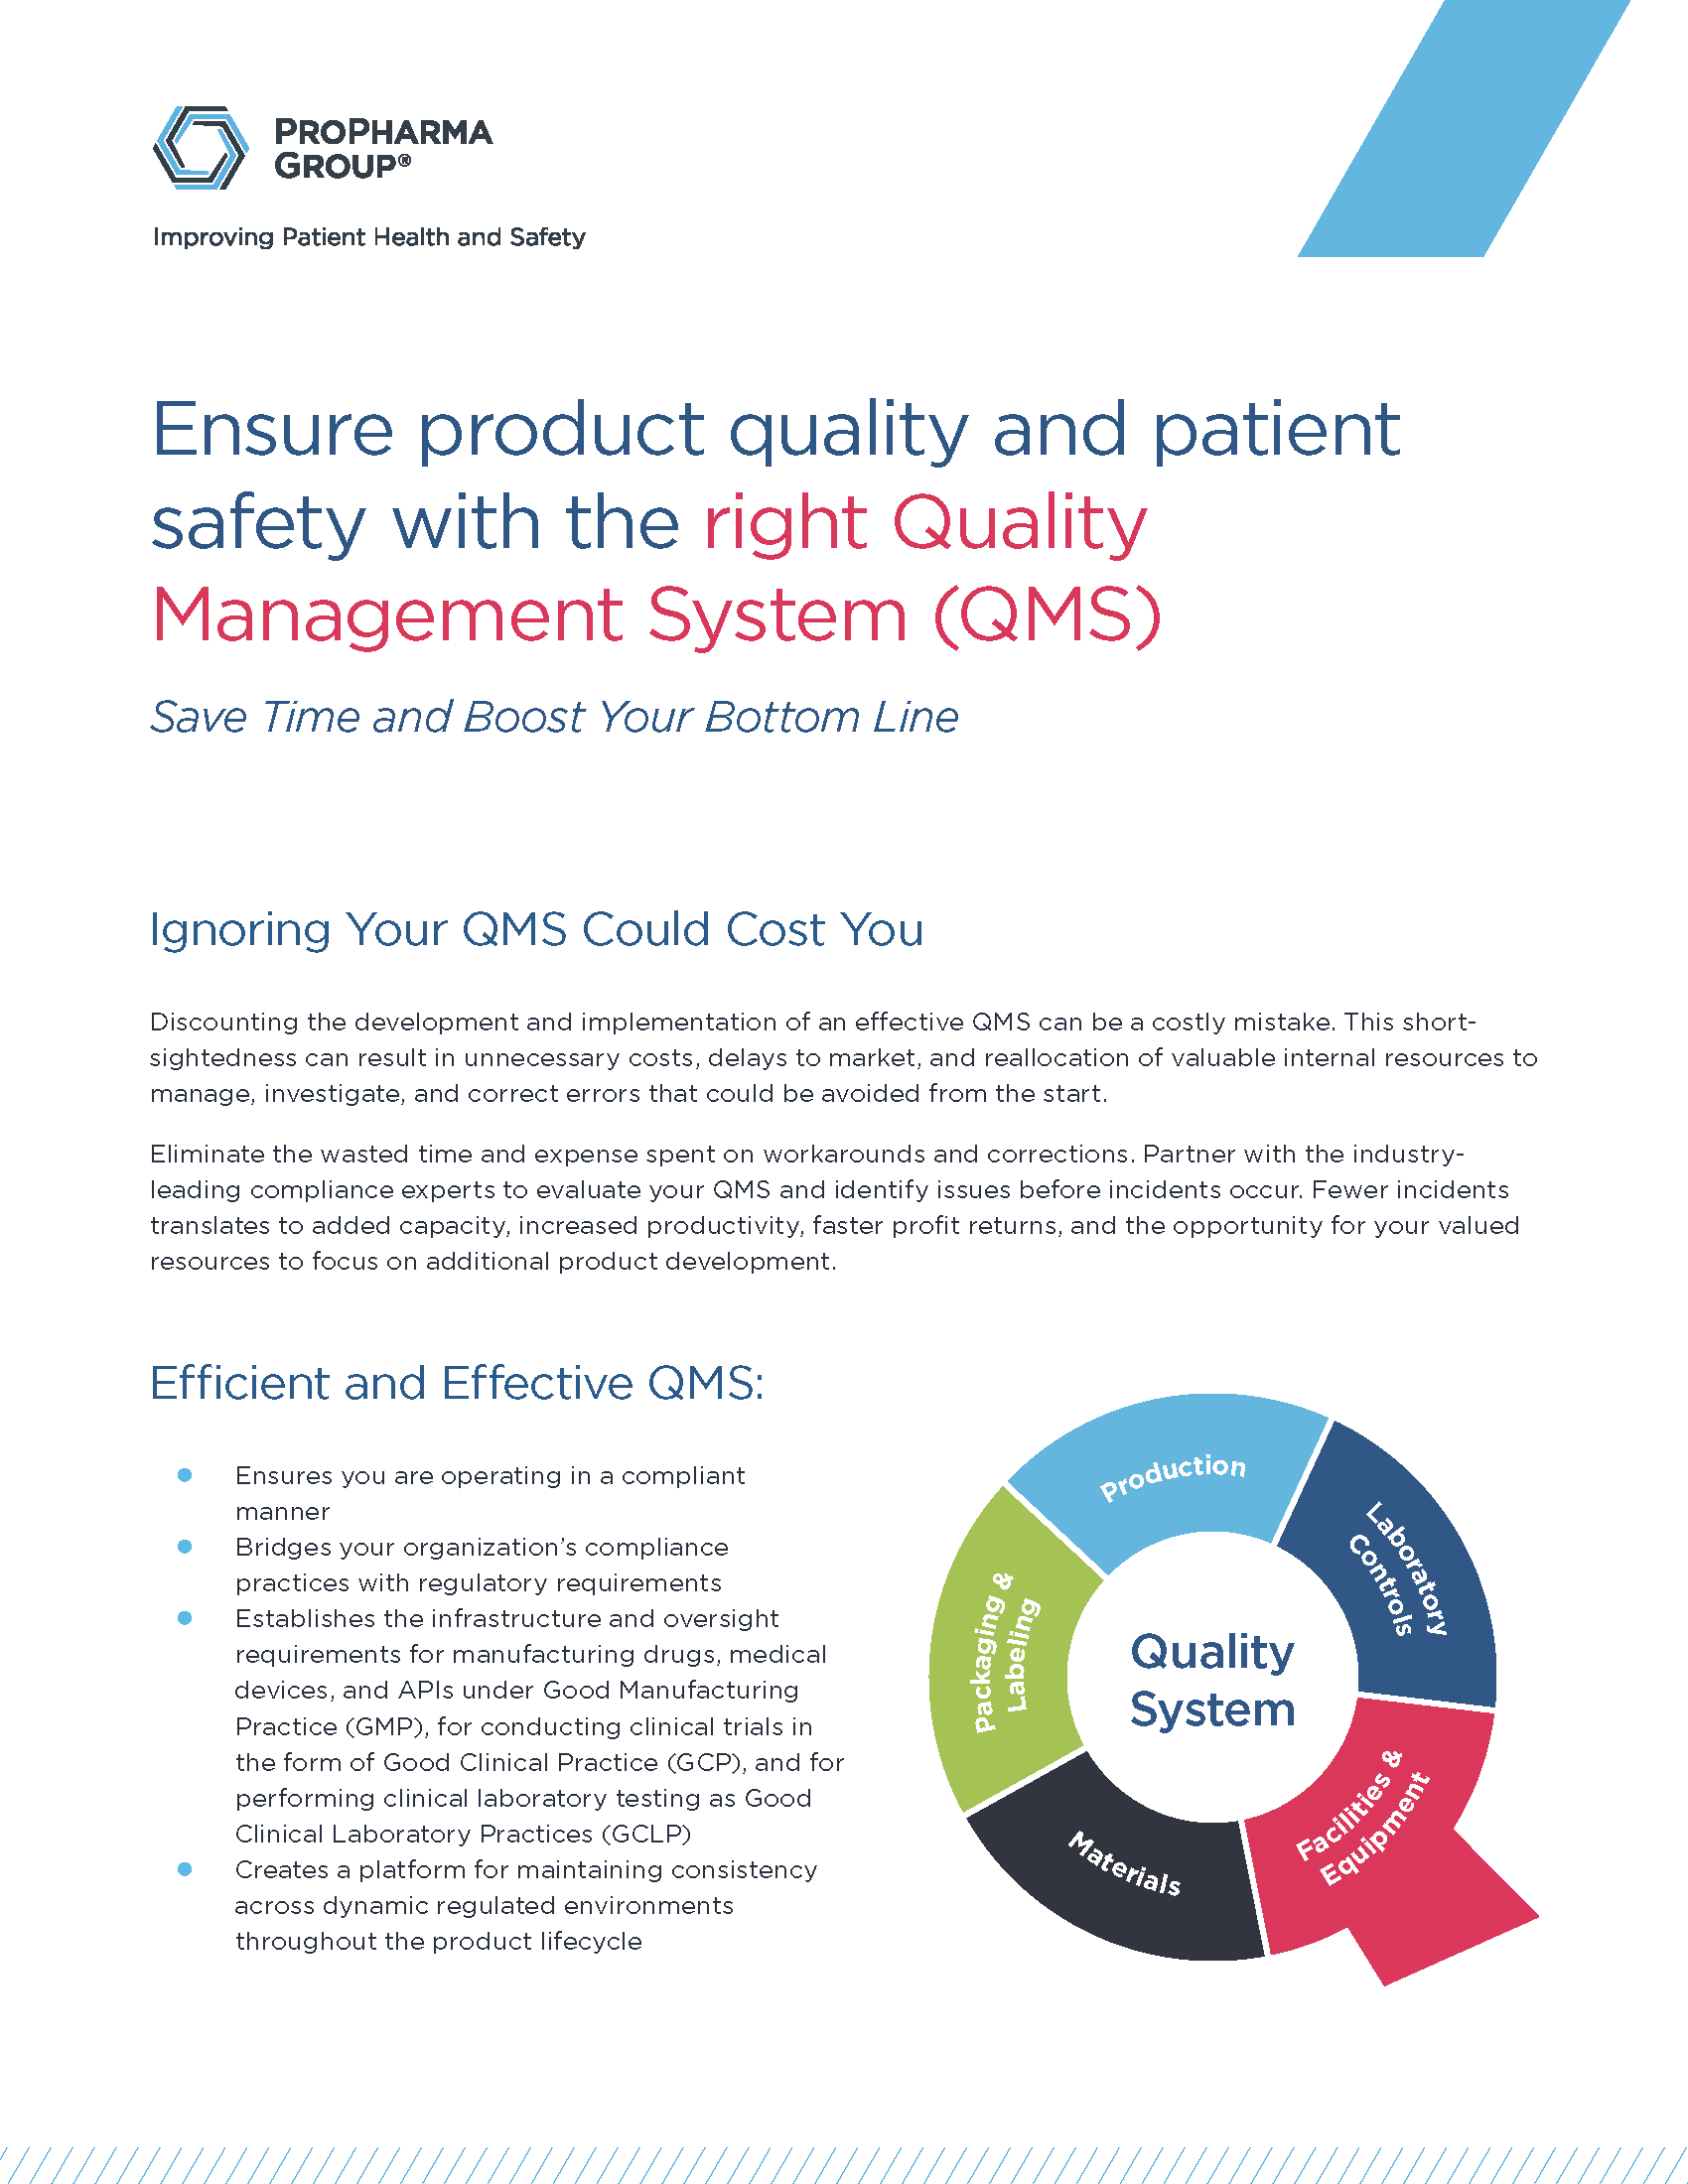 Ensure Product Quality and Patient Safety With the Right Quality Management System (QMS)